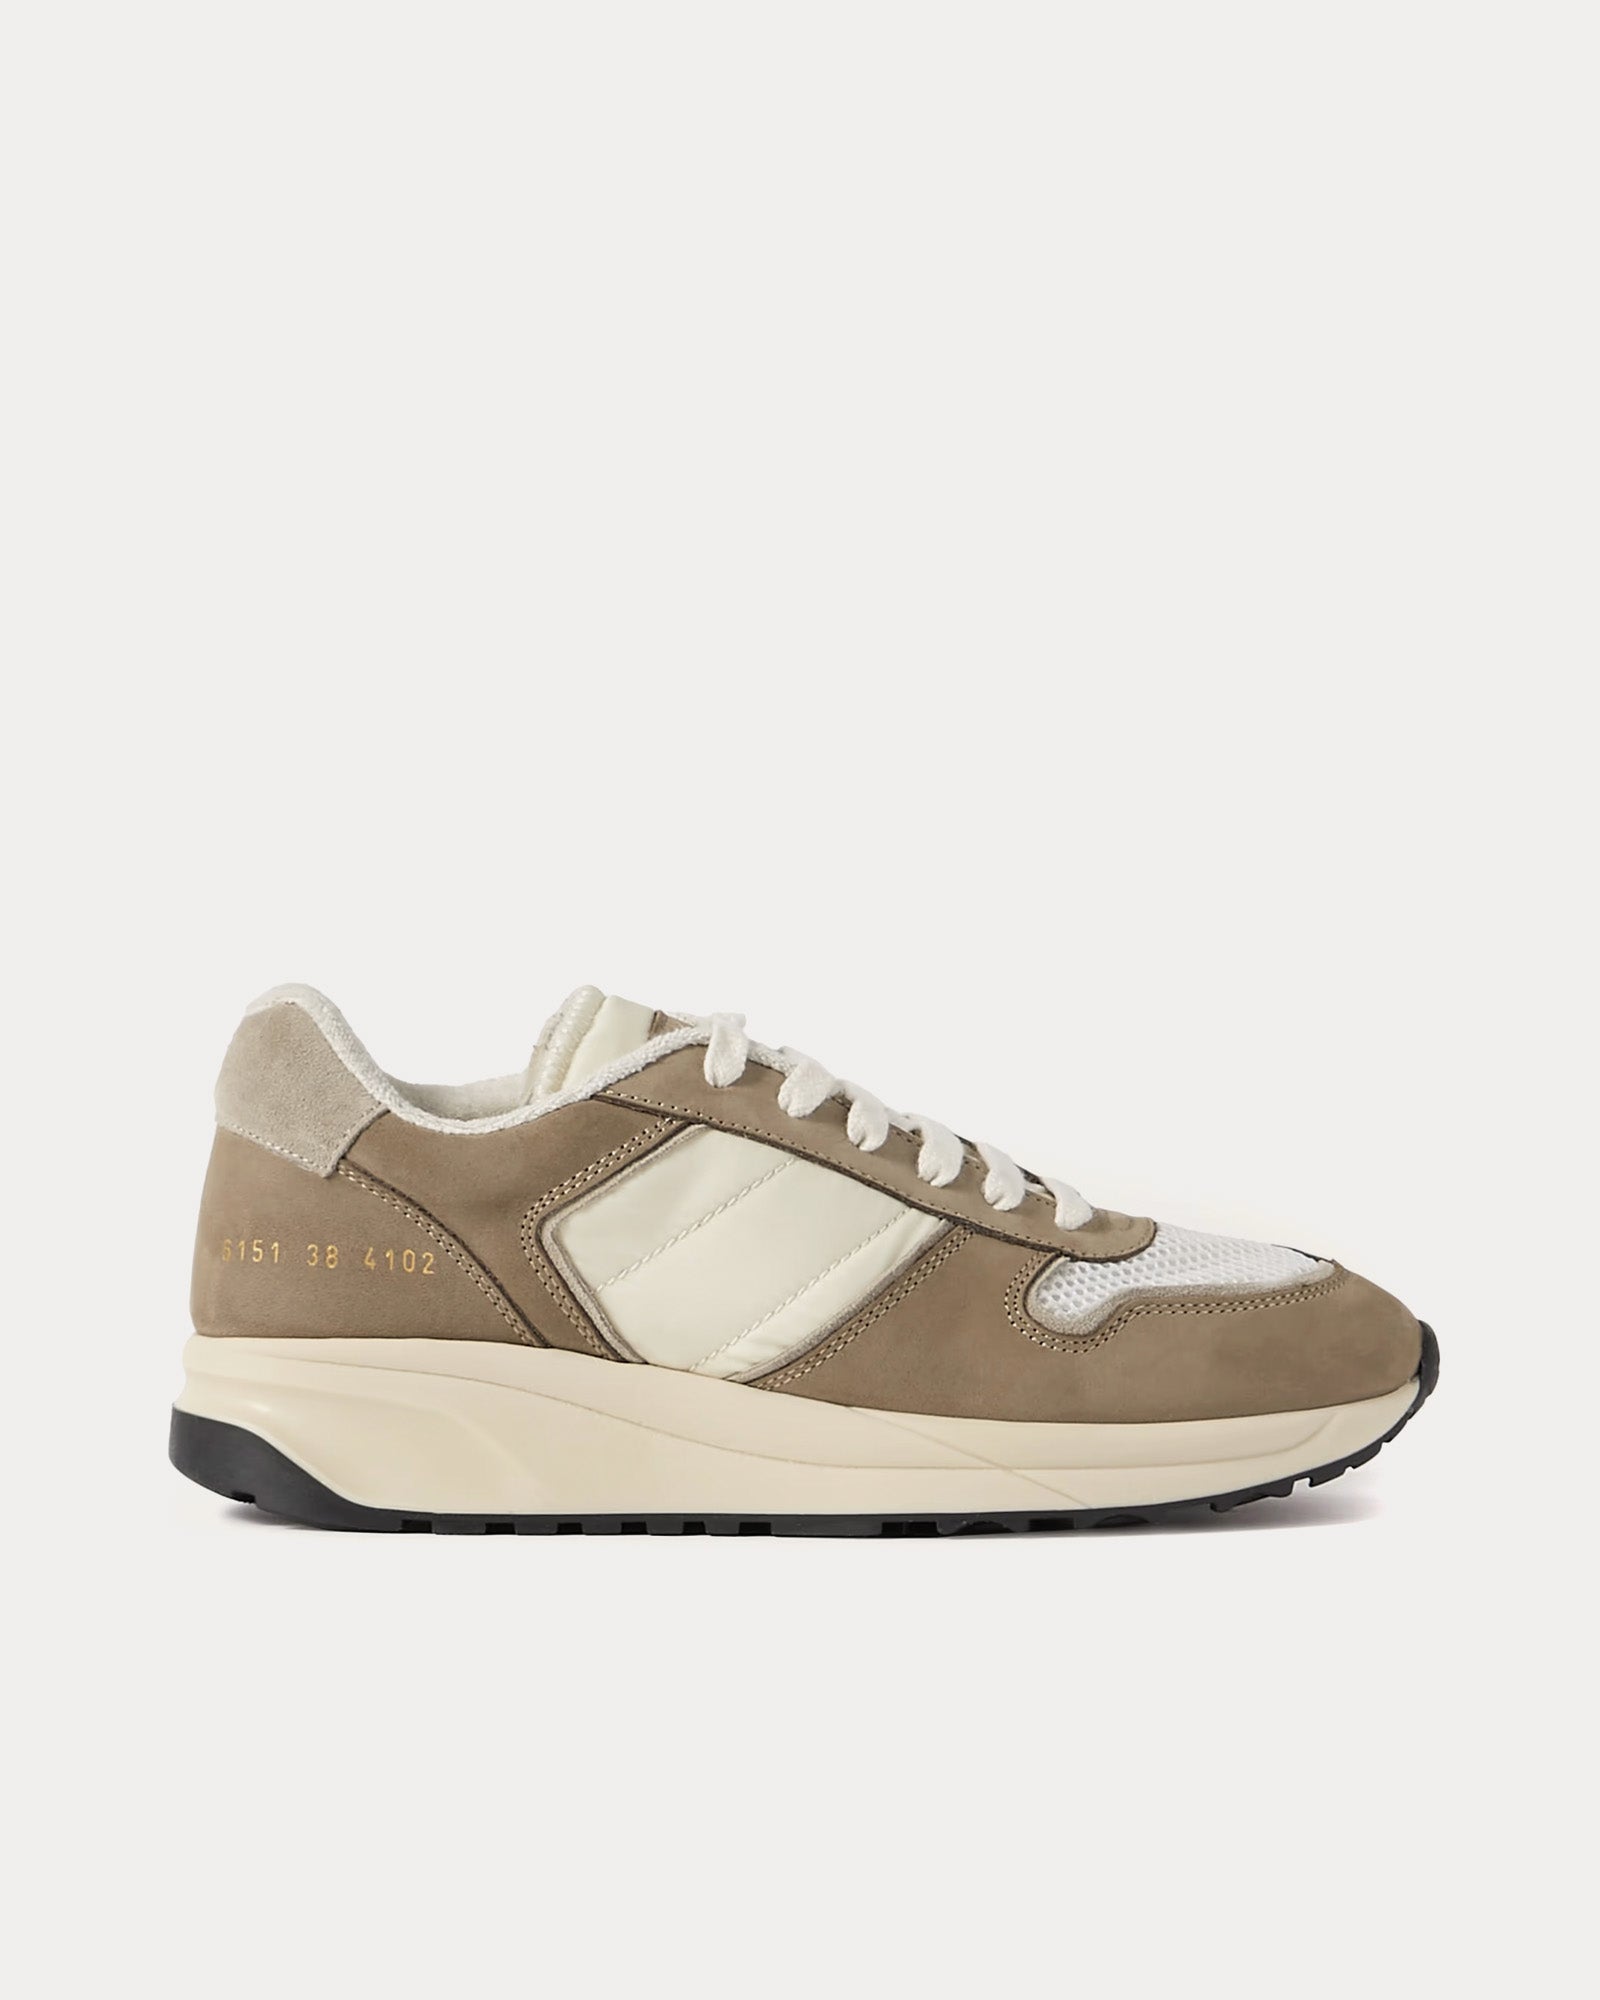 Common Projects - Track SS24 Brown / Beige Low Top Sneakers